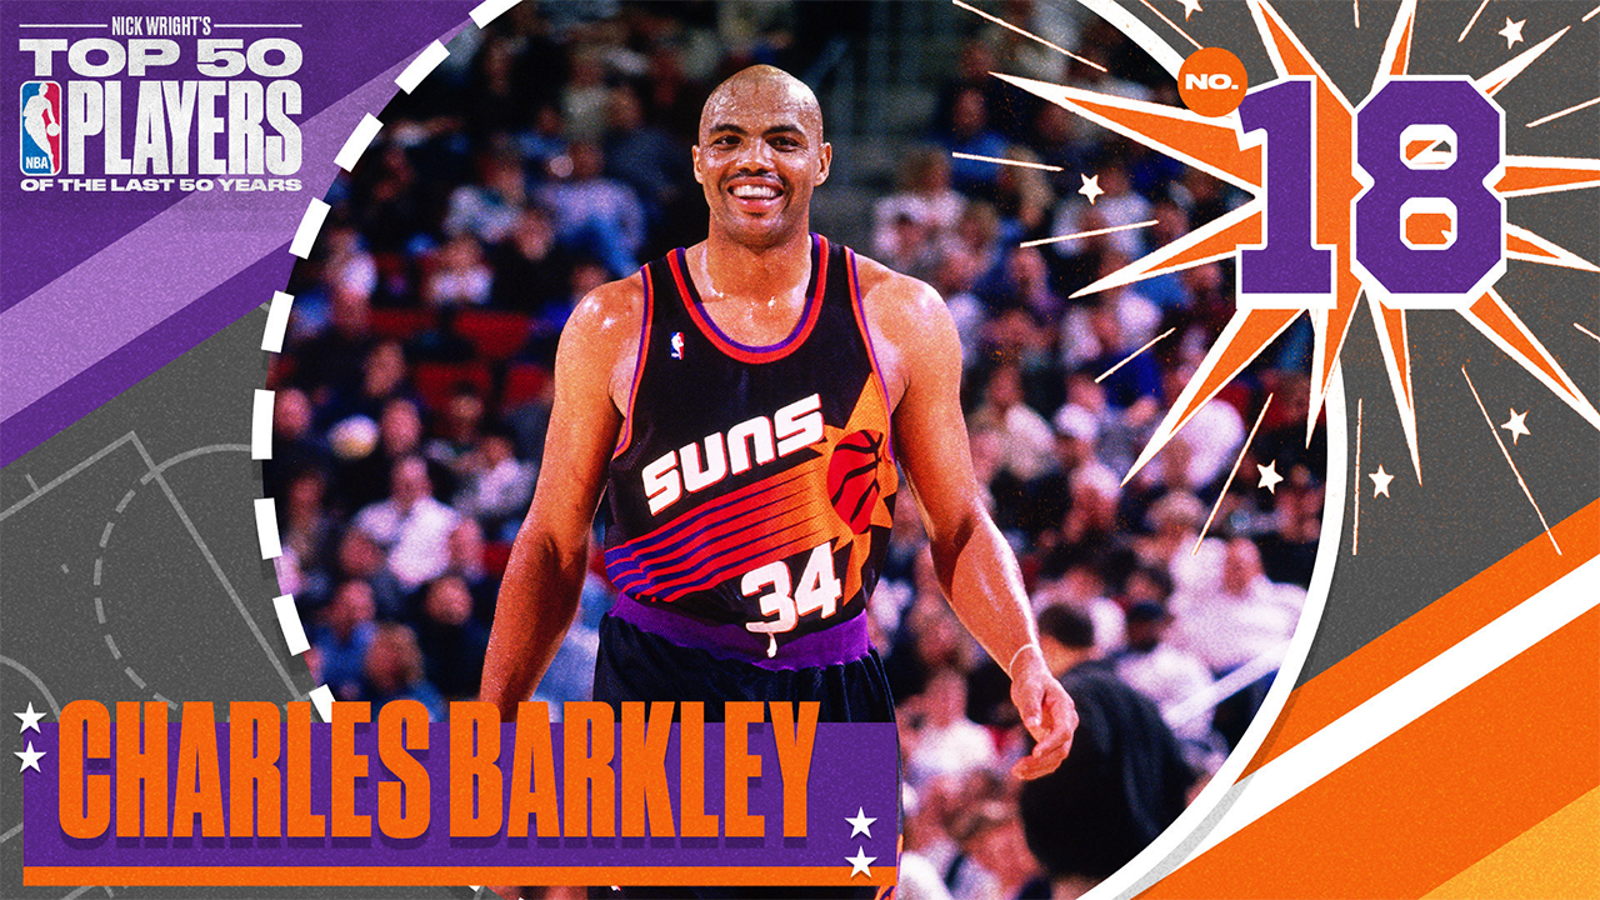 Charles Barkley is No. 18 on Nick Wright's Top 50 NBA Players of the Last 50 Years